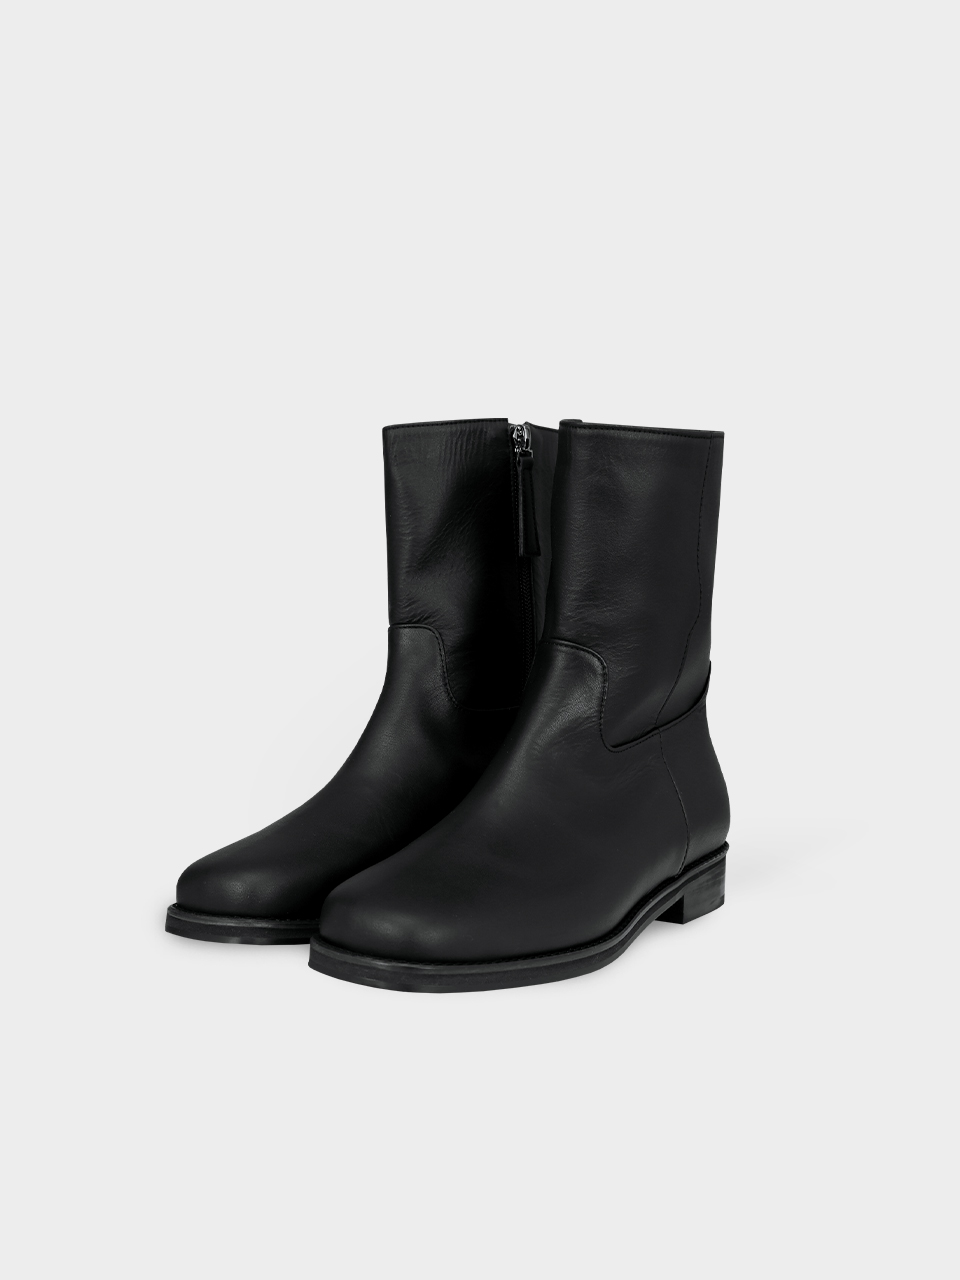 Middle boots _ Black